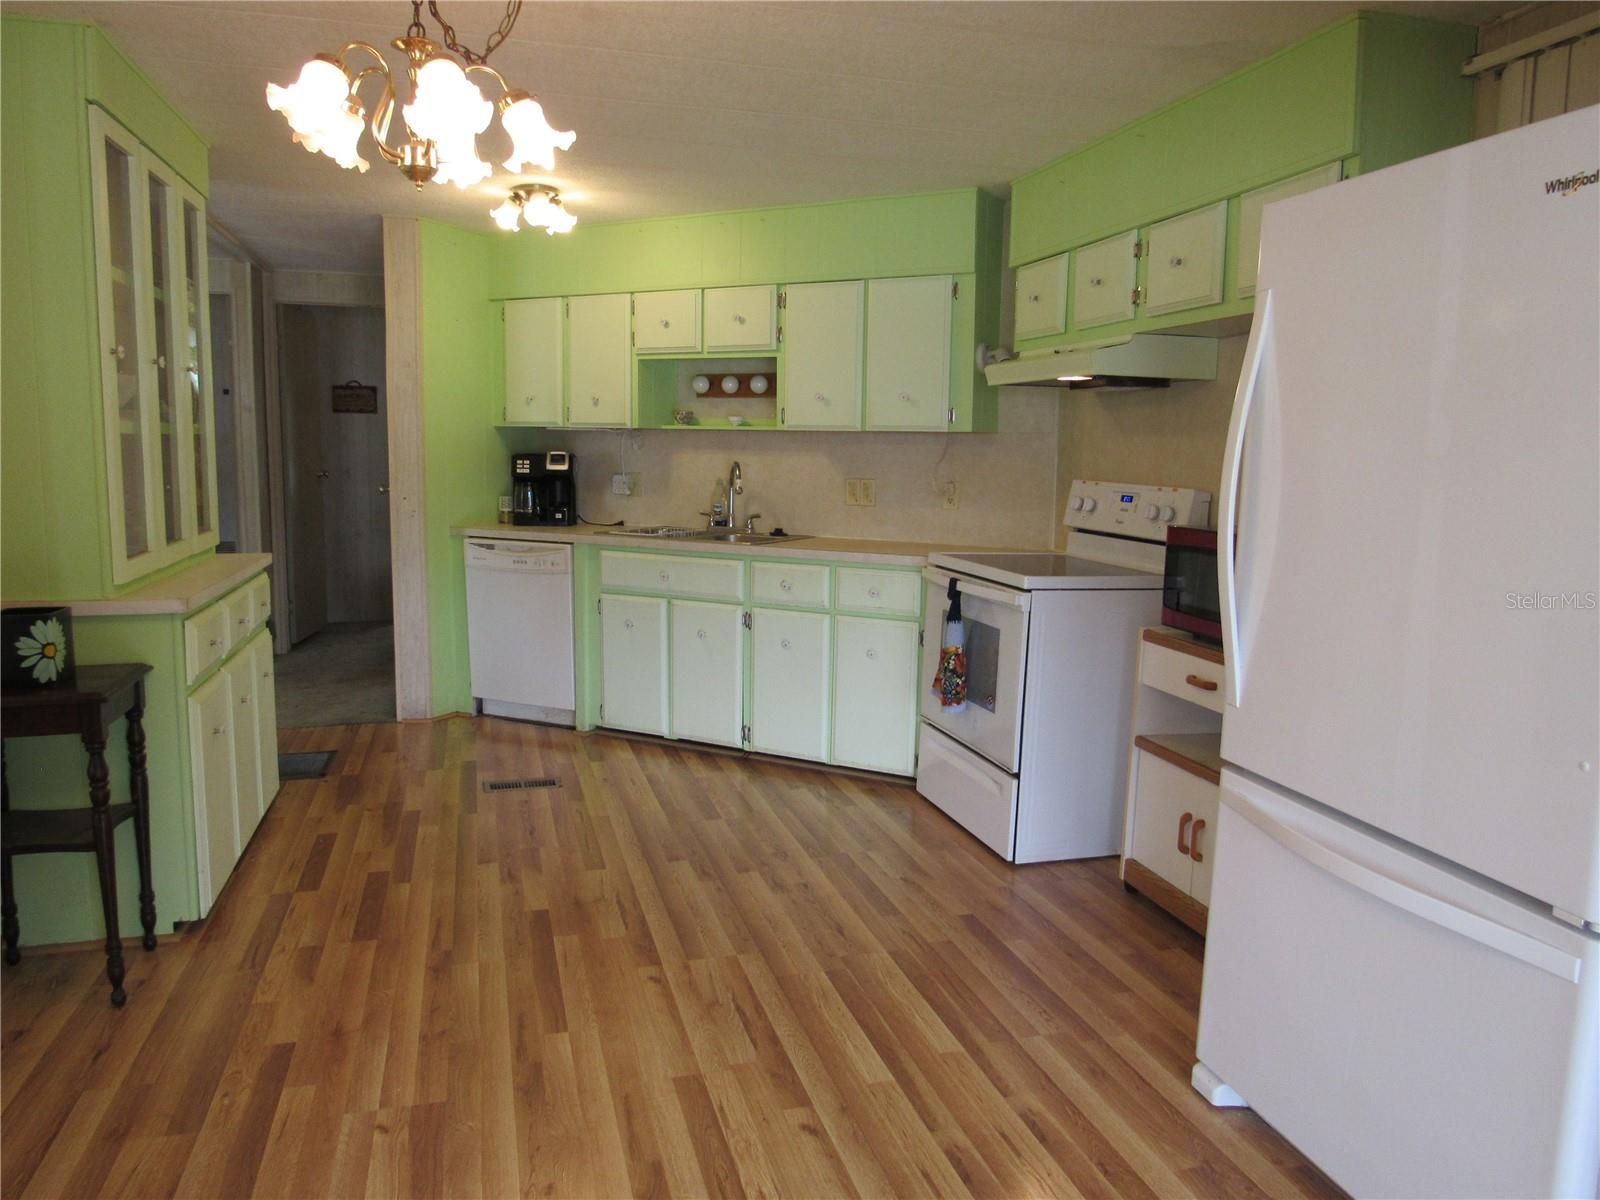 Spacious eat-in kitchen with laminate flooring.